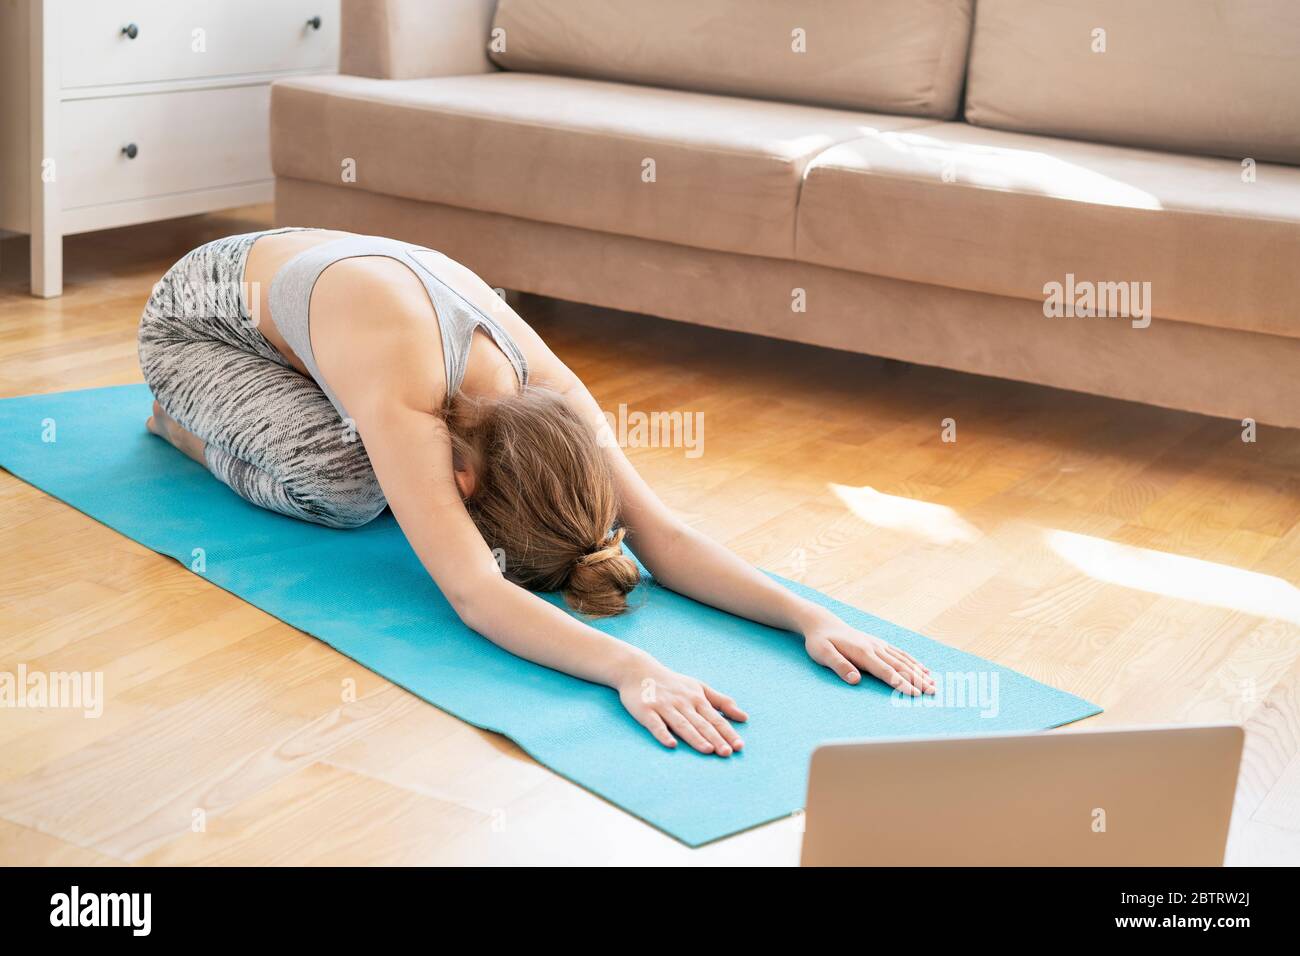 Young attractive women doing yoga exercise at home, Balasana, Child Pose, Ardha-Kurmasana Half Tortoise Pose in livingroom. Working out wearing sportswear bra and pants. Healthcare concept Stock Photo